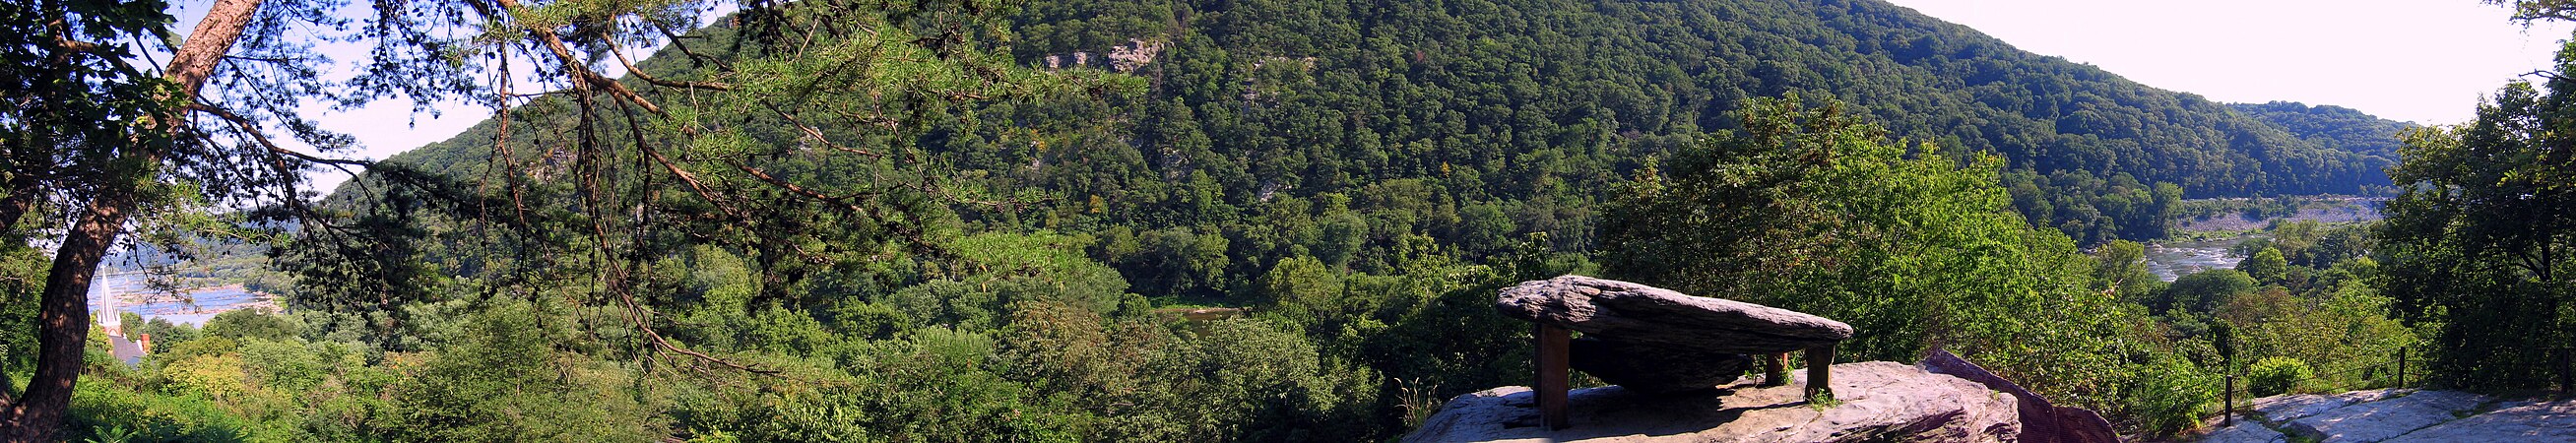 This is a panoramic view of Jefferson Rock (right foreground) and the surrounding river valley. The lower town of Harpers Ferry and the confluence of the Shenandoah and Potomac Rivers appears on the left. The church steeple (also left) belongs to St. Peter's Roman Catholic Church.